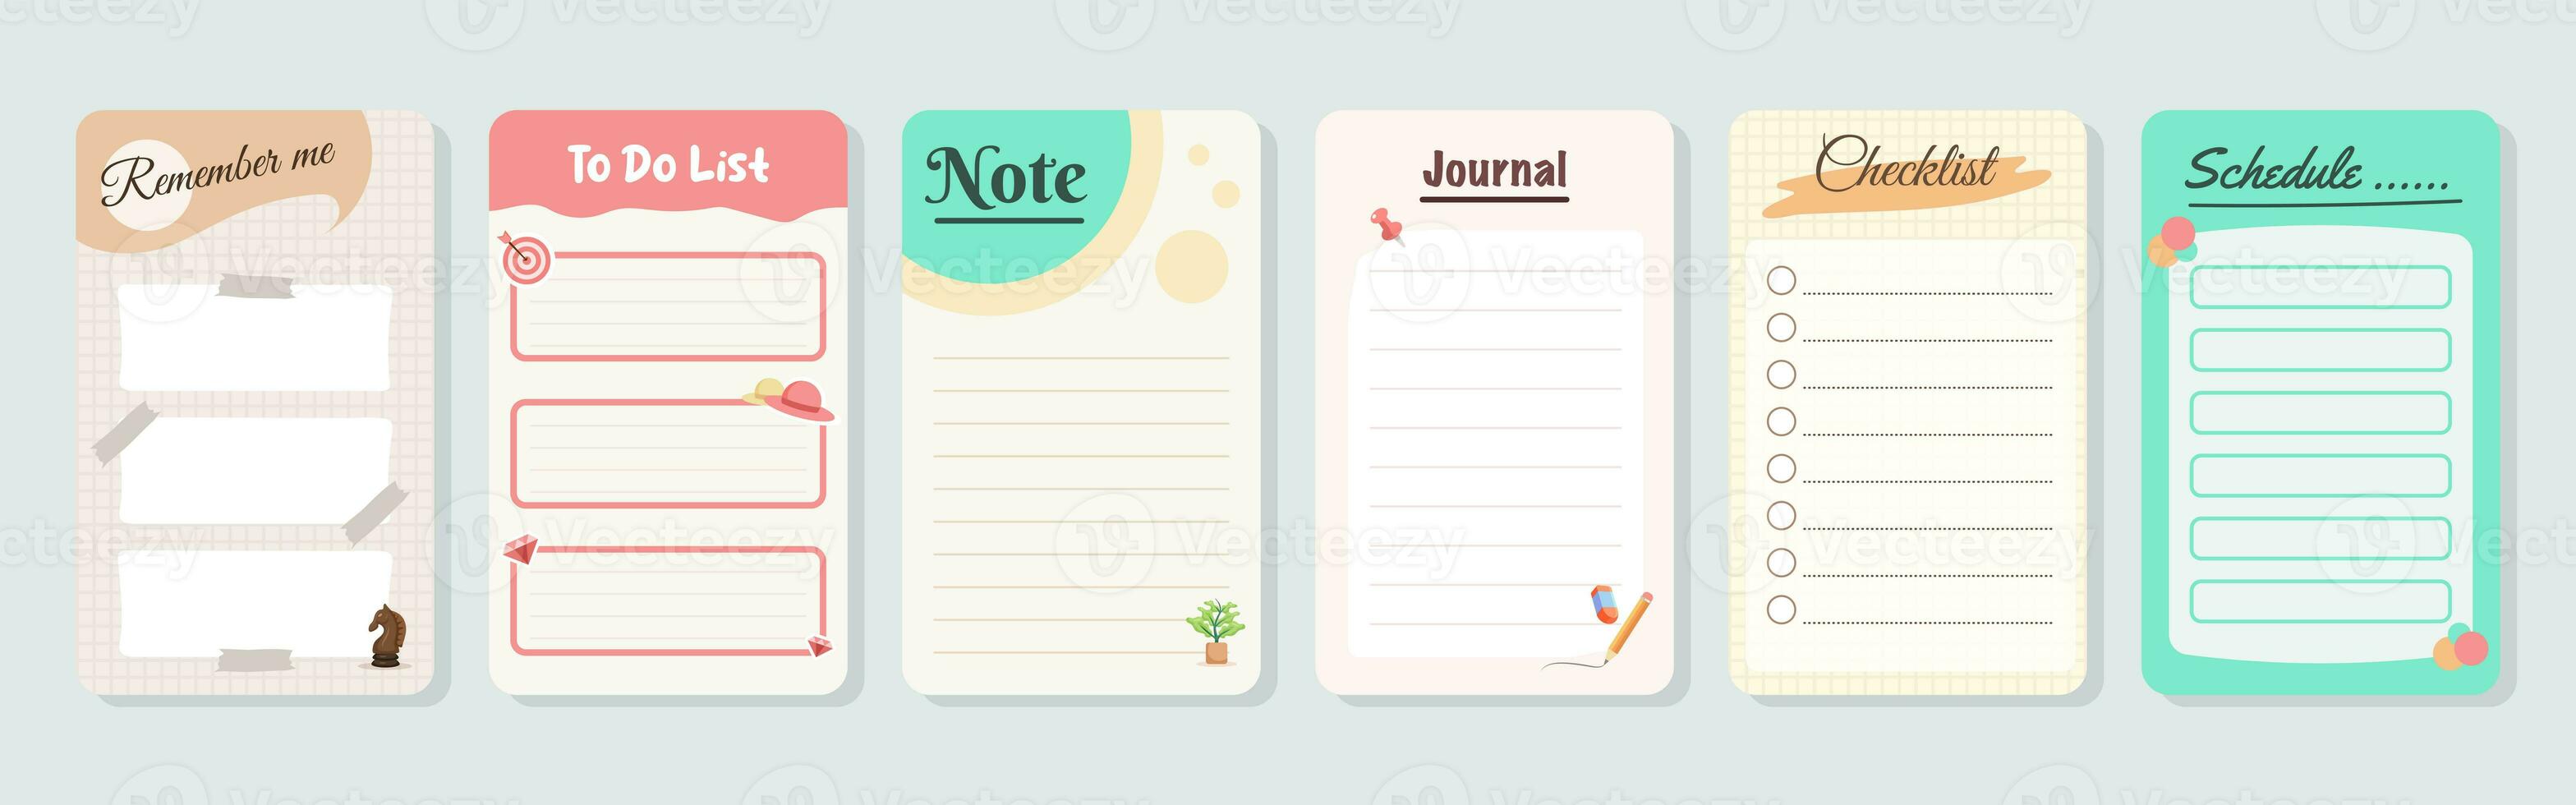 Set of planners and to do list with home interior decor illustrations. Template for agenda, schedule, planners, checklists, notebooks, cards and other stationery. photo